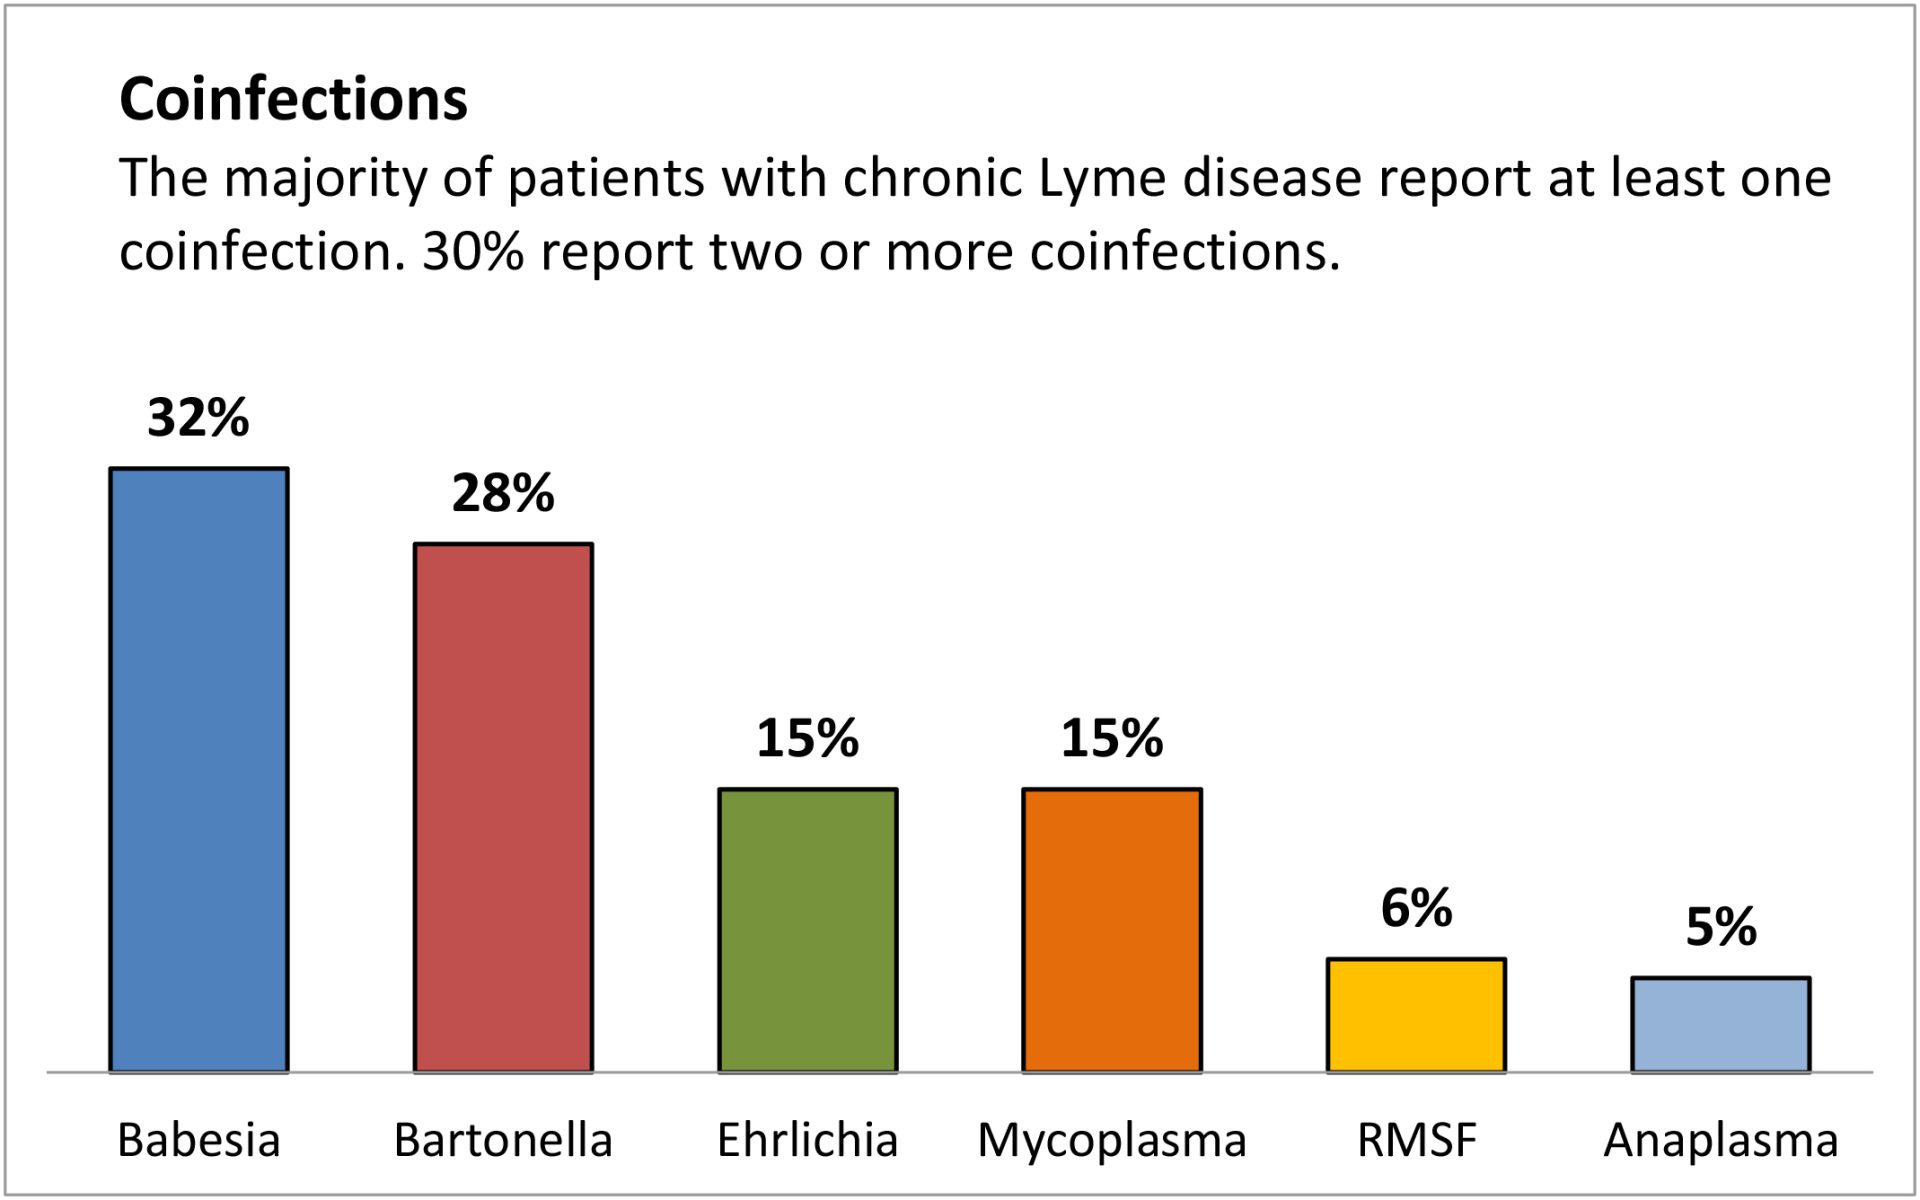 Lyme disease with co-infections: a complex picture